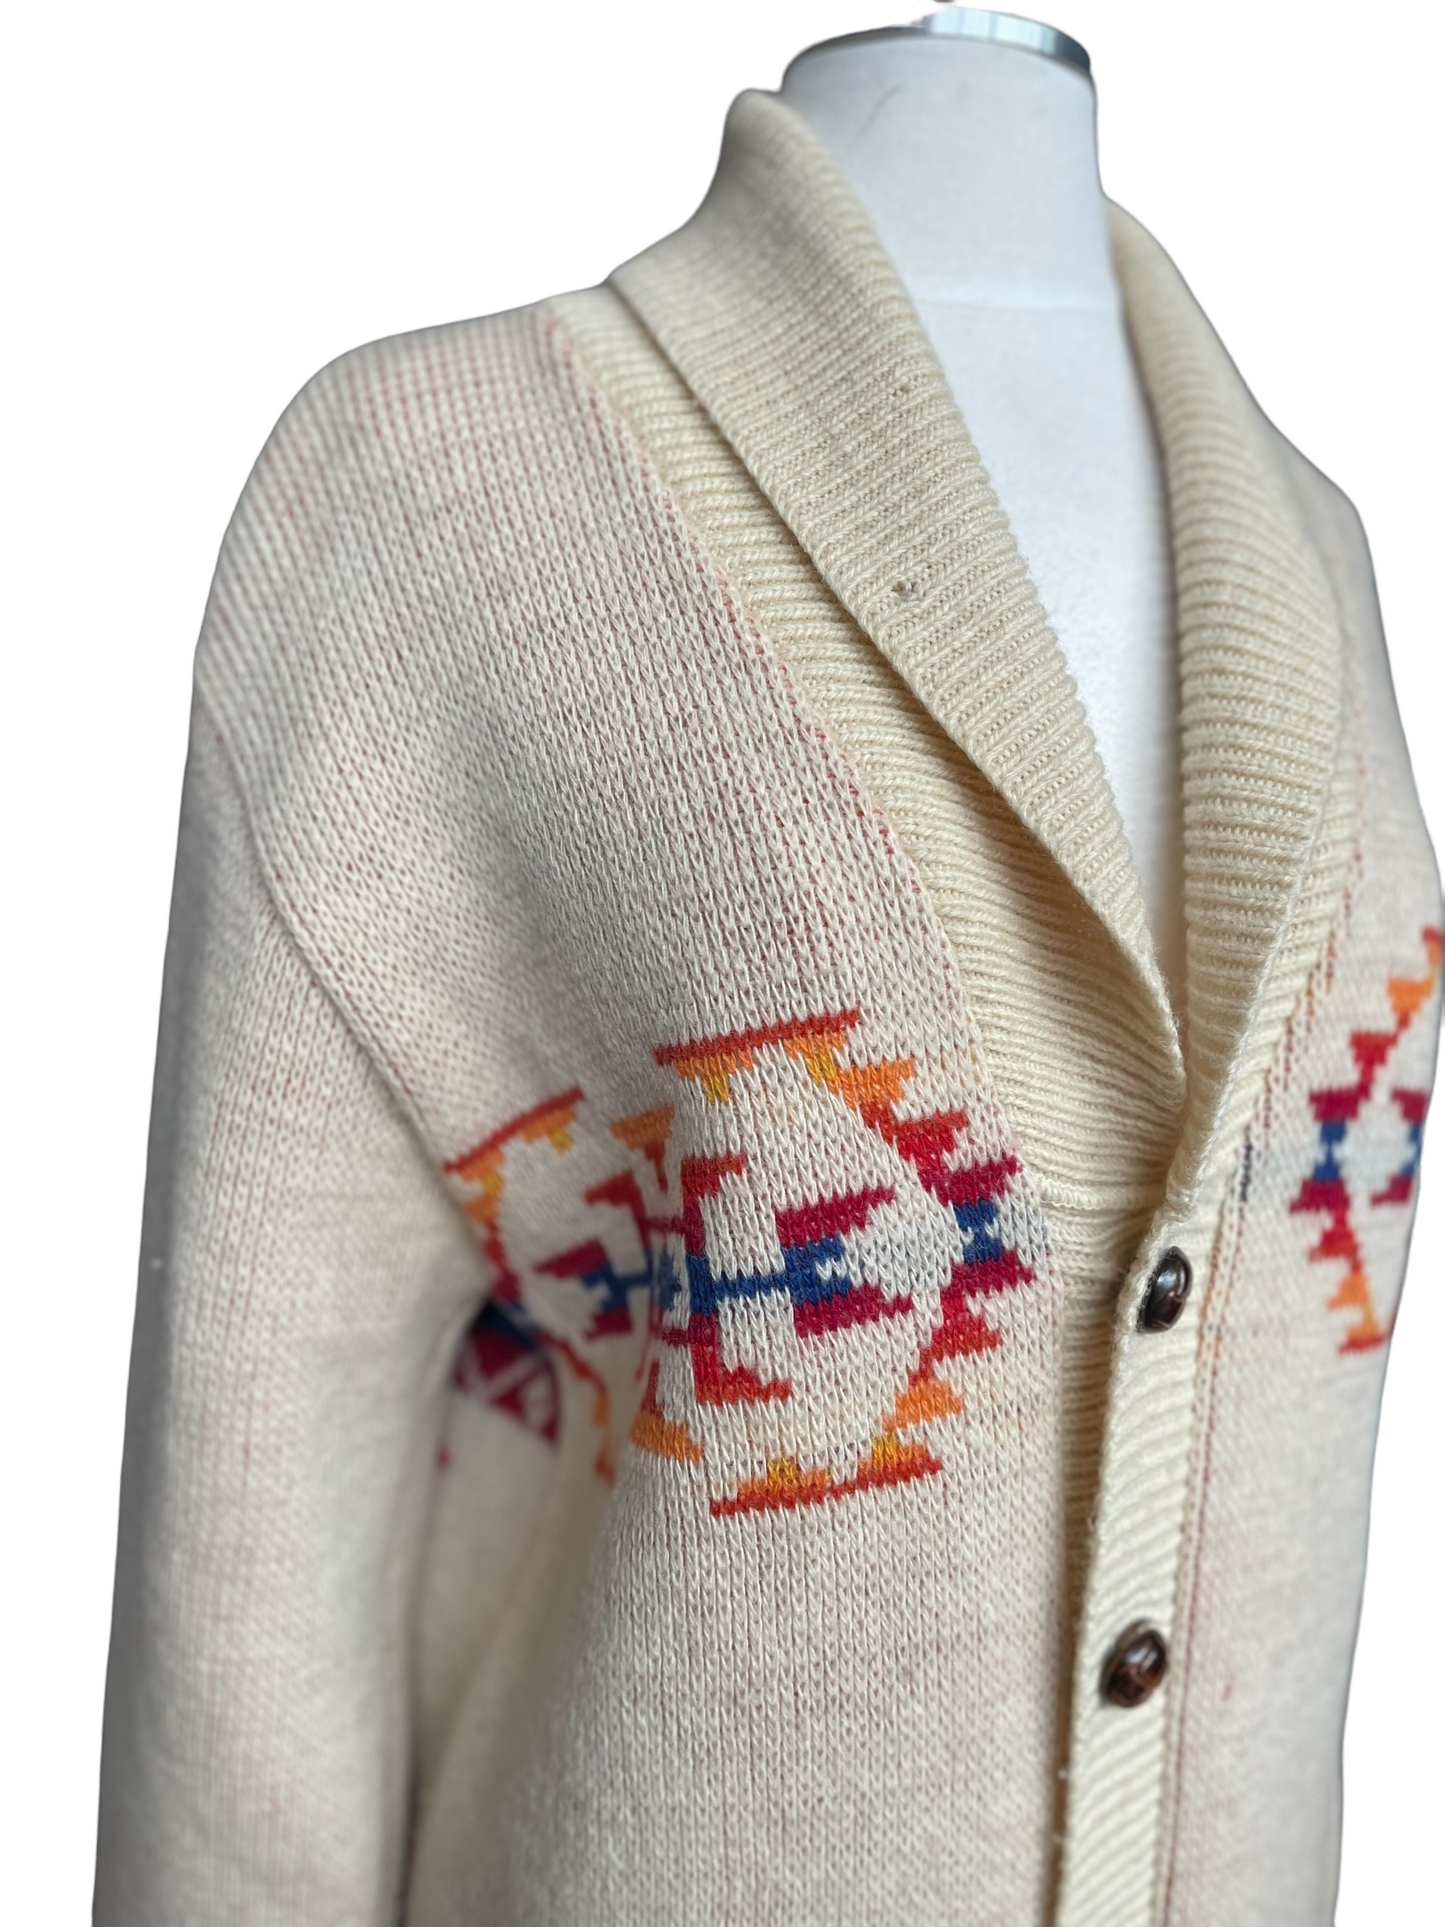 Vintage Pendleton Western Wear Cardigan | Barn Owl Vintage | Seattle Vintage Sweaters Right side front. Small hole at collar.